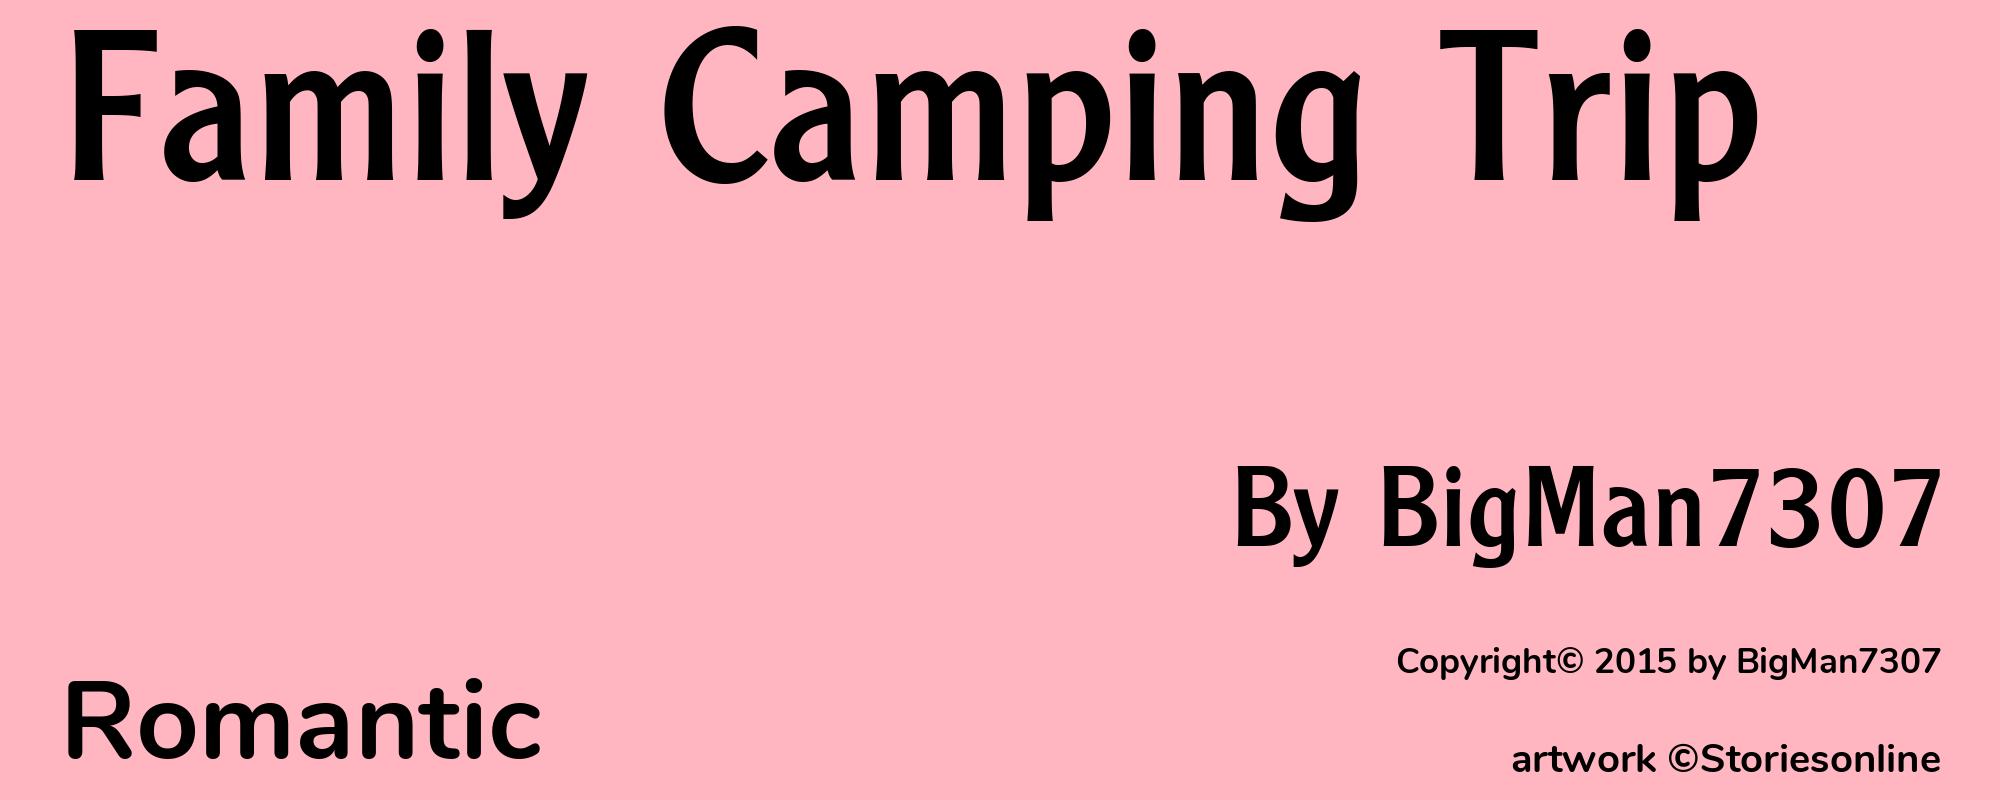 Family Camping Trip - Cover